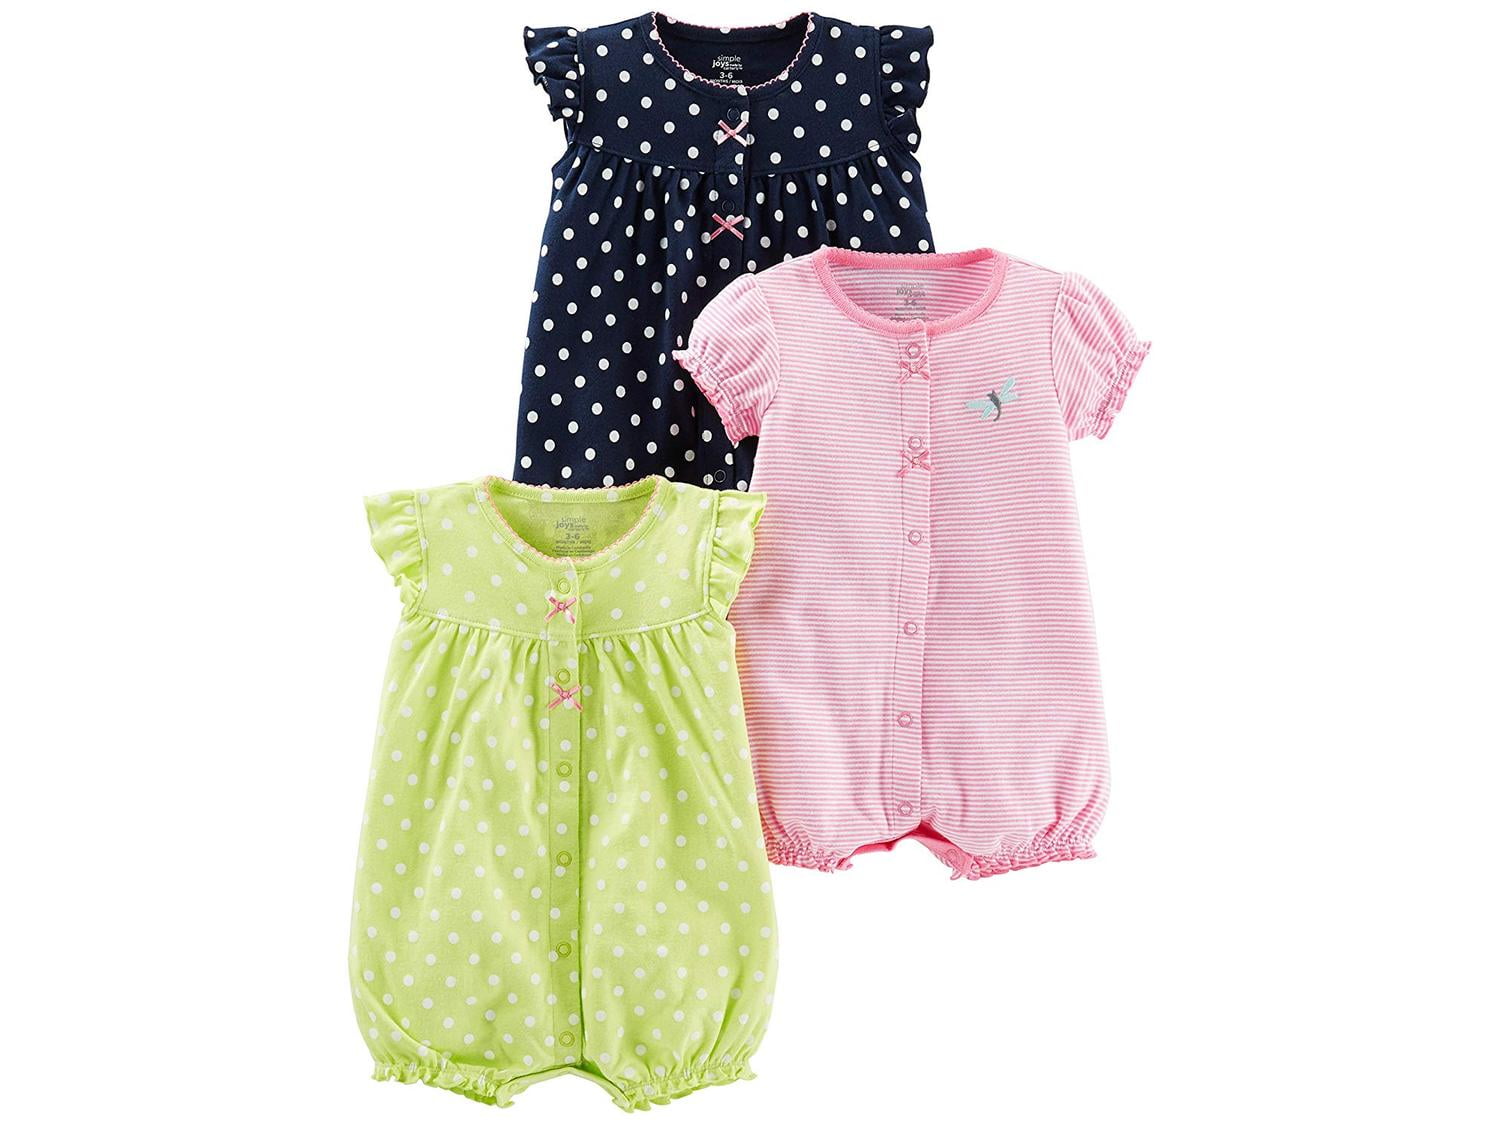 Simple Joys made by Carters Child Size 0-3 Months Pink Outfit - girls